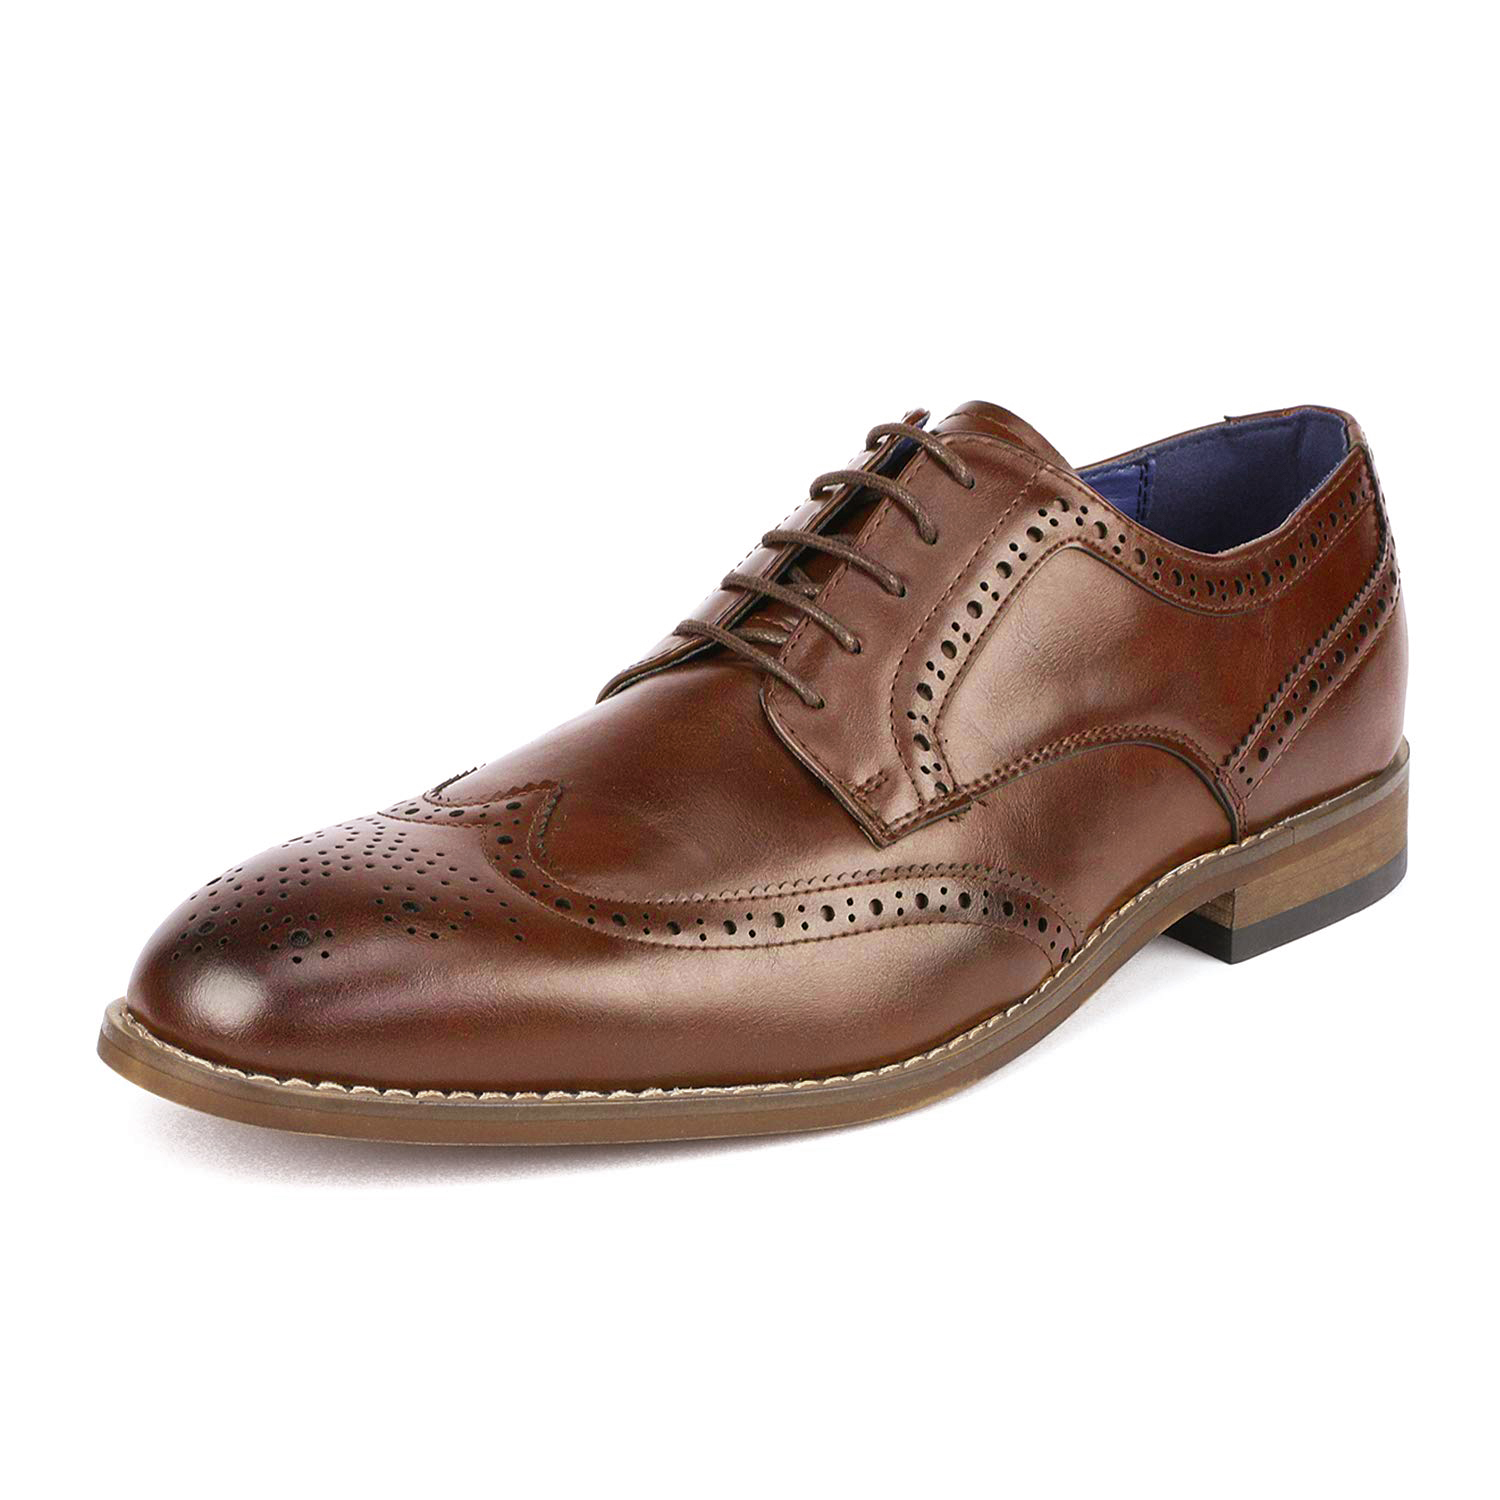 Bruno Marc Mens Brogue Oxford Shoes Lace up Wing Tip Dress Shoes Casual Shoes WILLIAM_2 BROWN Size 8.5 - image 1 of 5